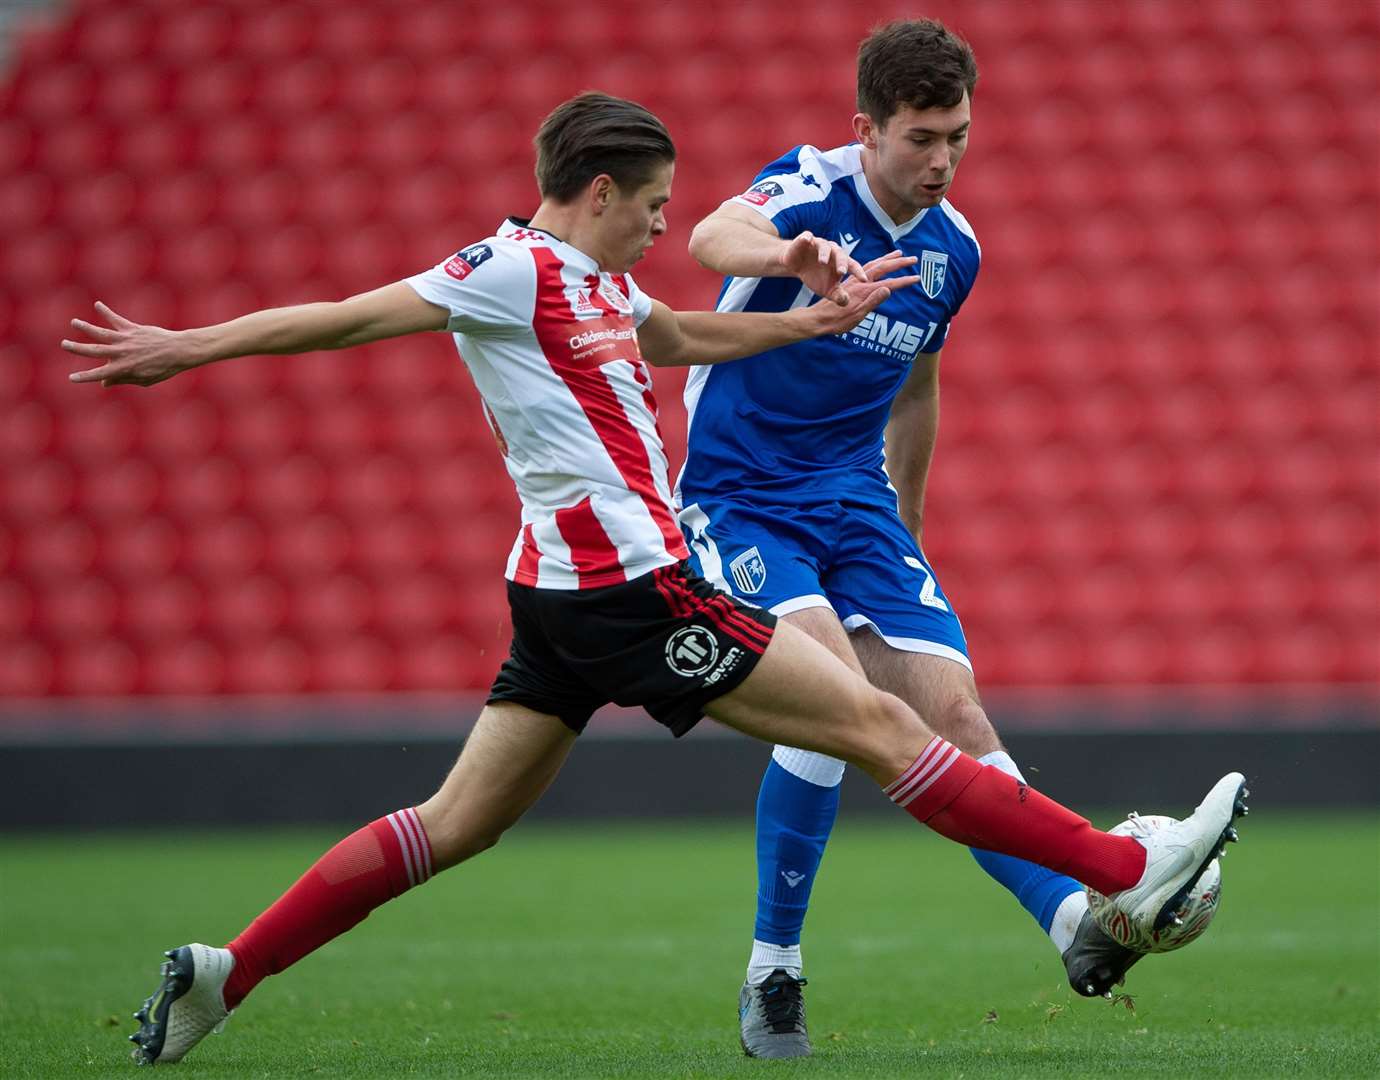 Tom O’Connor’s ball forward is closed down by Sunderland's George Dobson on Saturday Picture: Ady Kerry